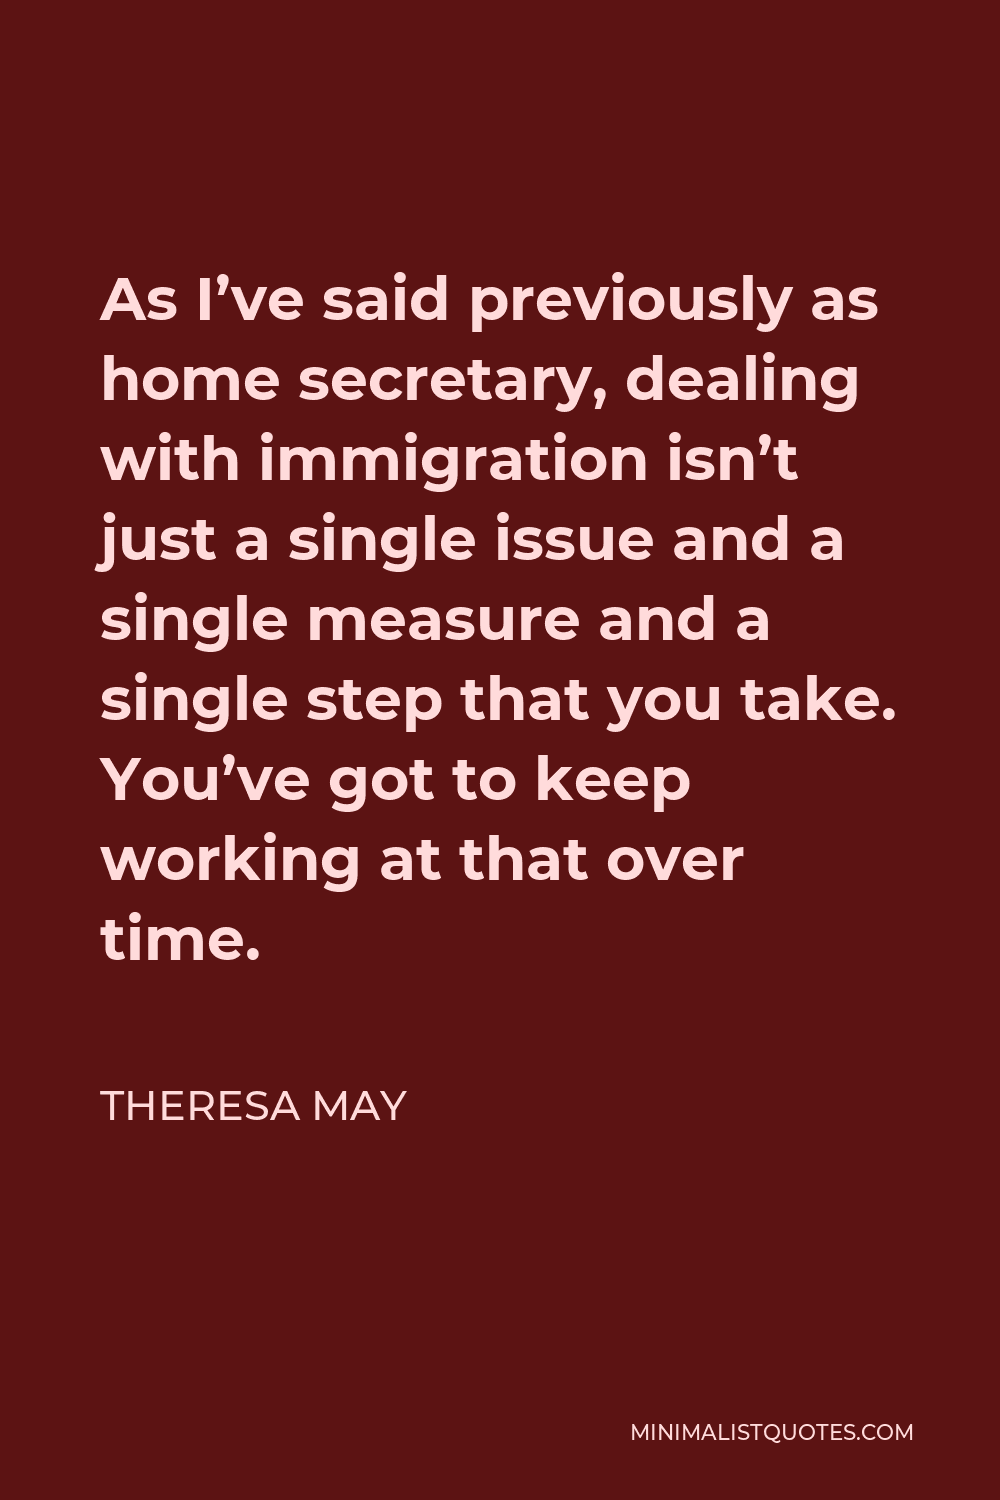 Theresa May Quote - As I’ve said previously as home secretary, dealing with immigration isn’t just a single issue and a single measure and a single step that you take. You’ve got to keep working at that over time.